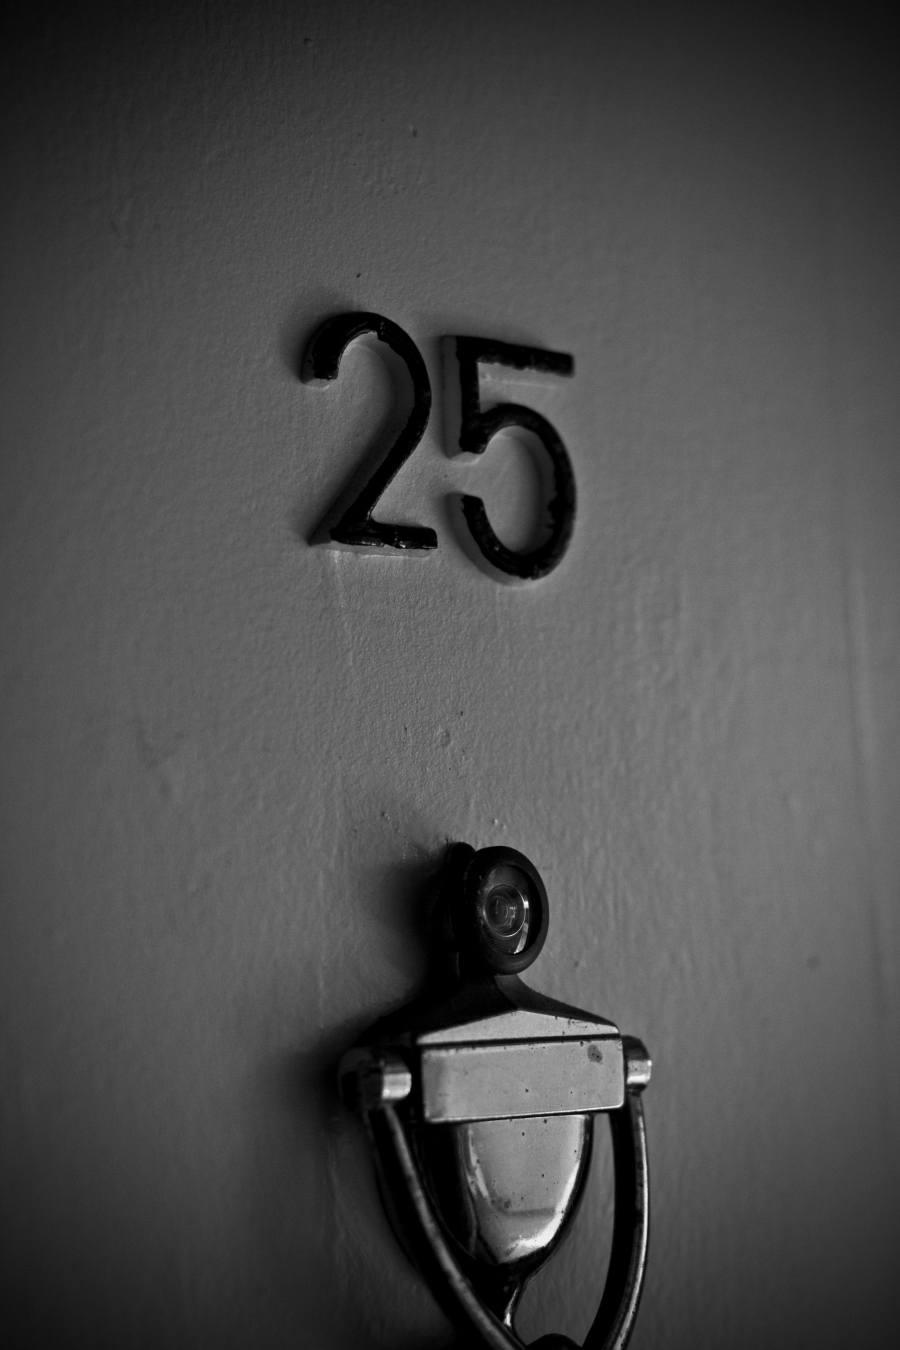 Address numbers reading 25 hung on a door with a door knocker and a peephole in black and white.